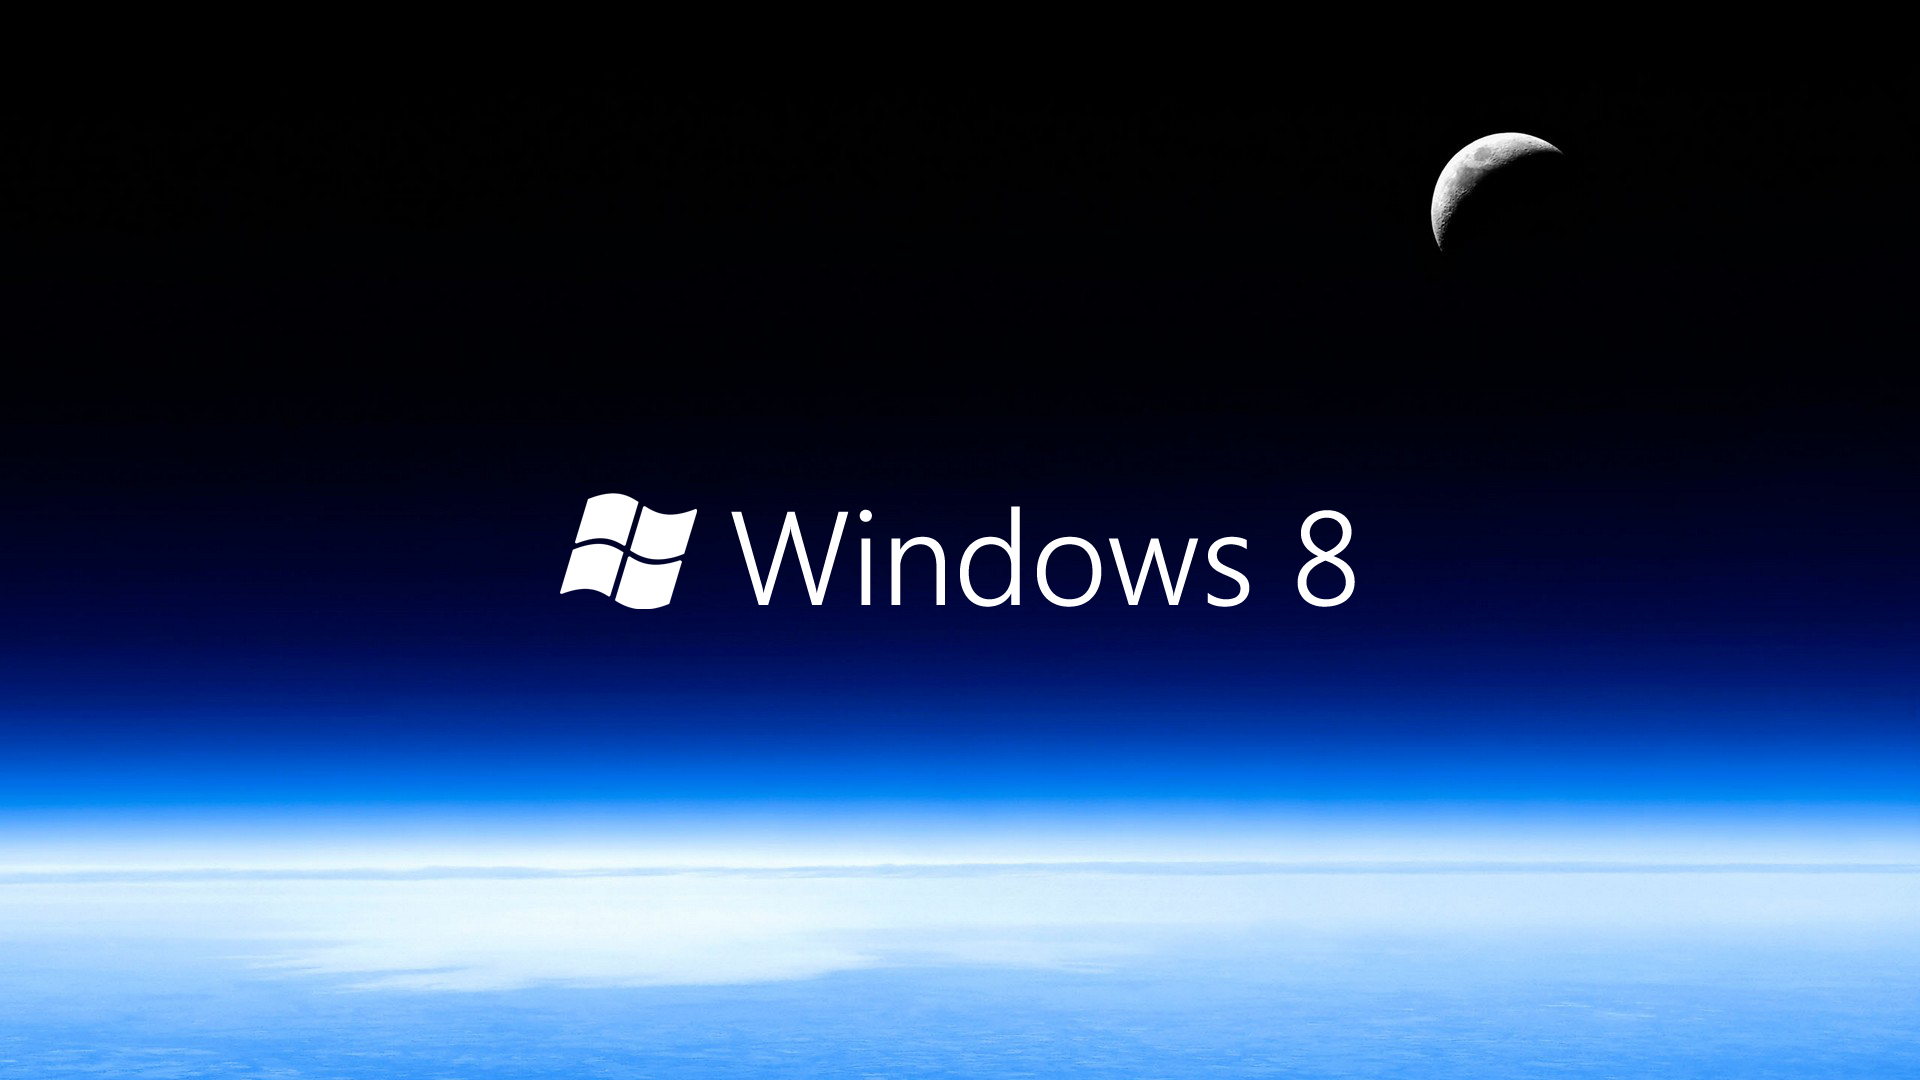 Windows 8 Wallpapers Themes - Wallpaper Zone